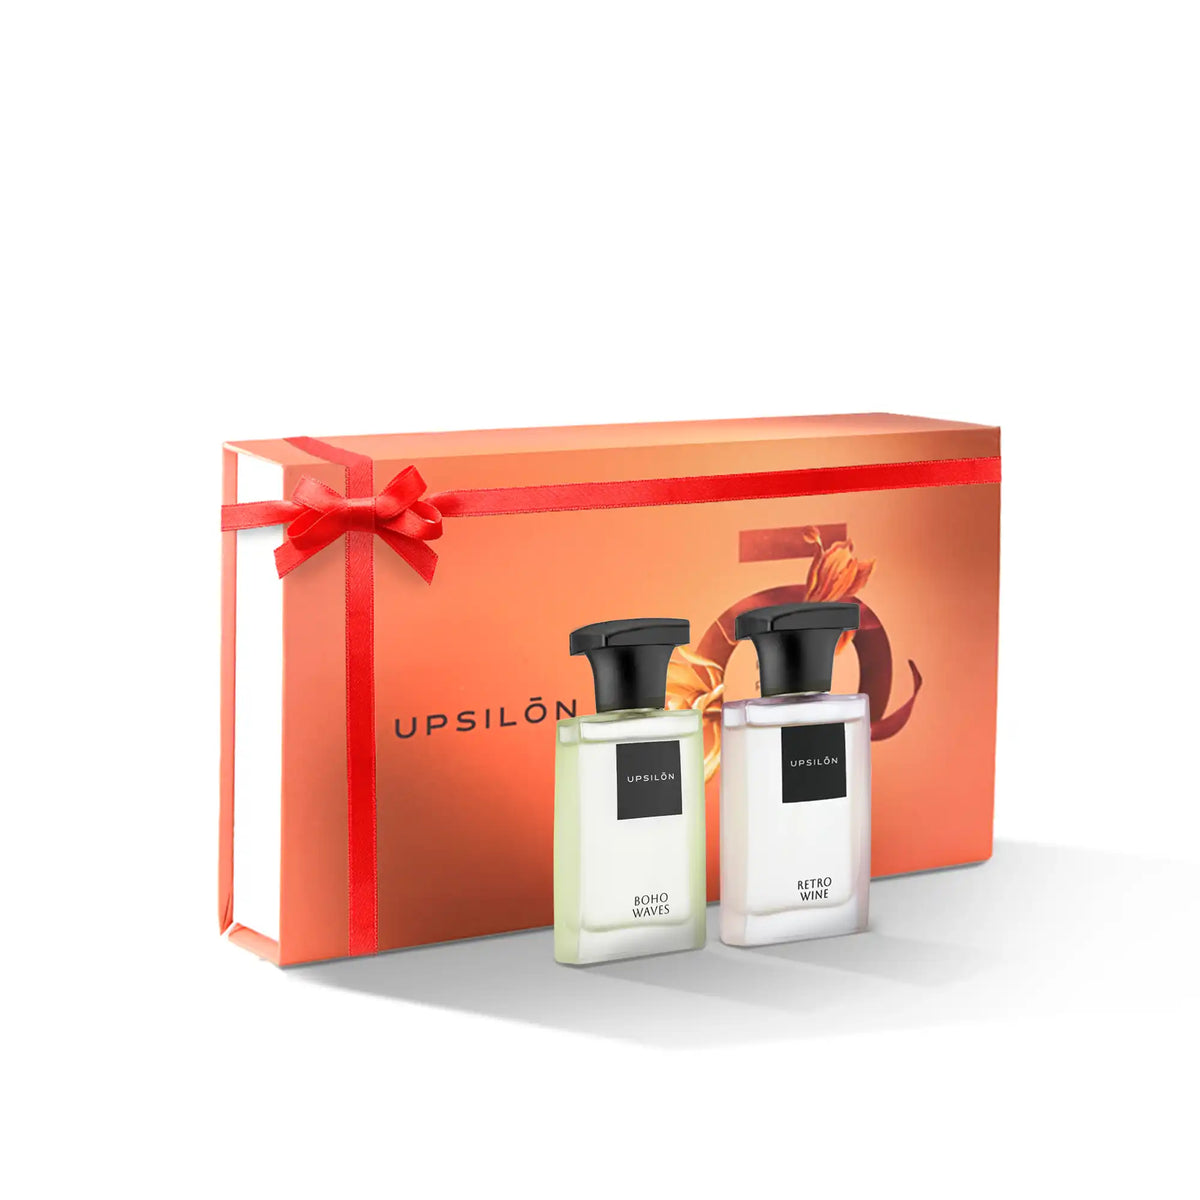 A festive gift box tied with a red ribbon, containing two bottles of Upsilon Eau de Parfum in travel sizes, perfect for gifting or self-indulgence